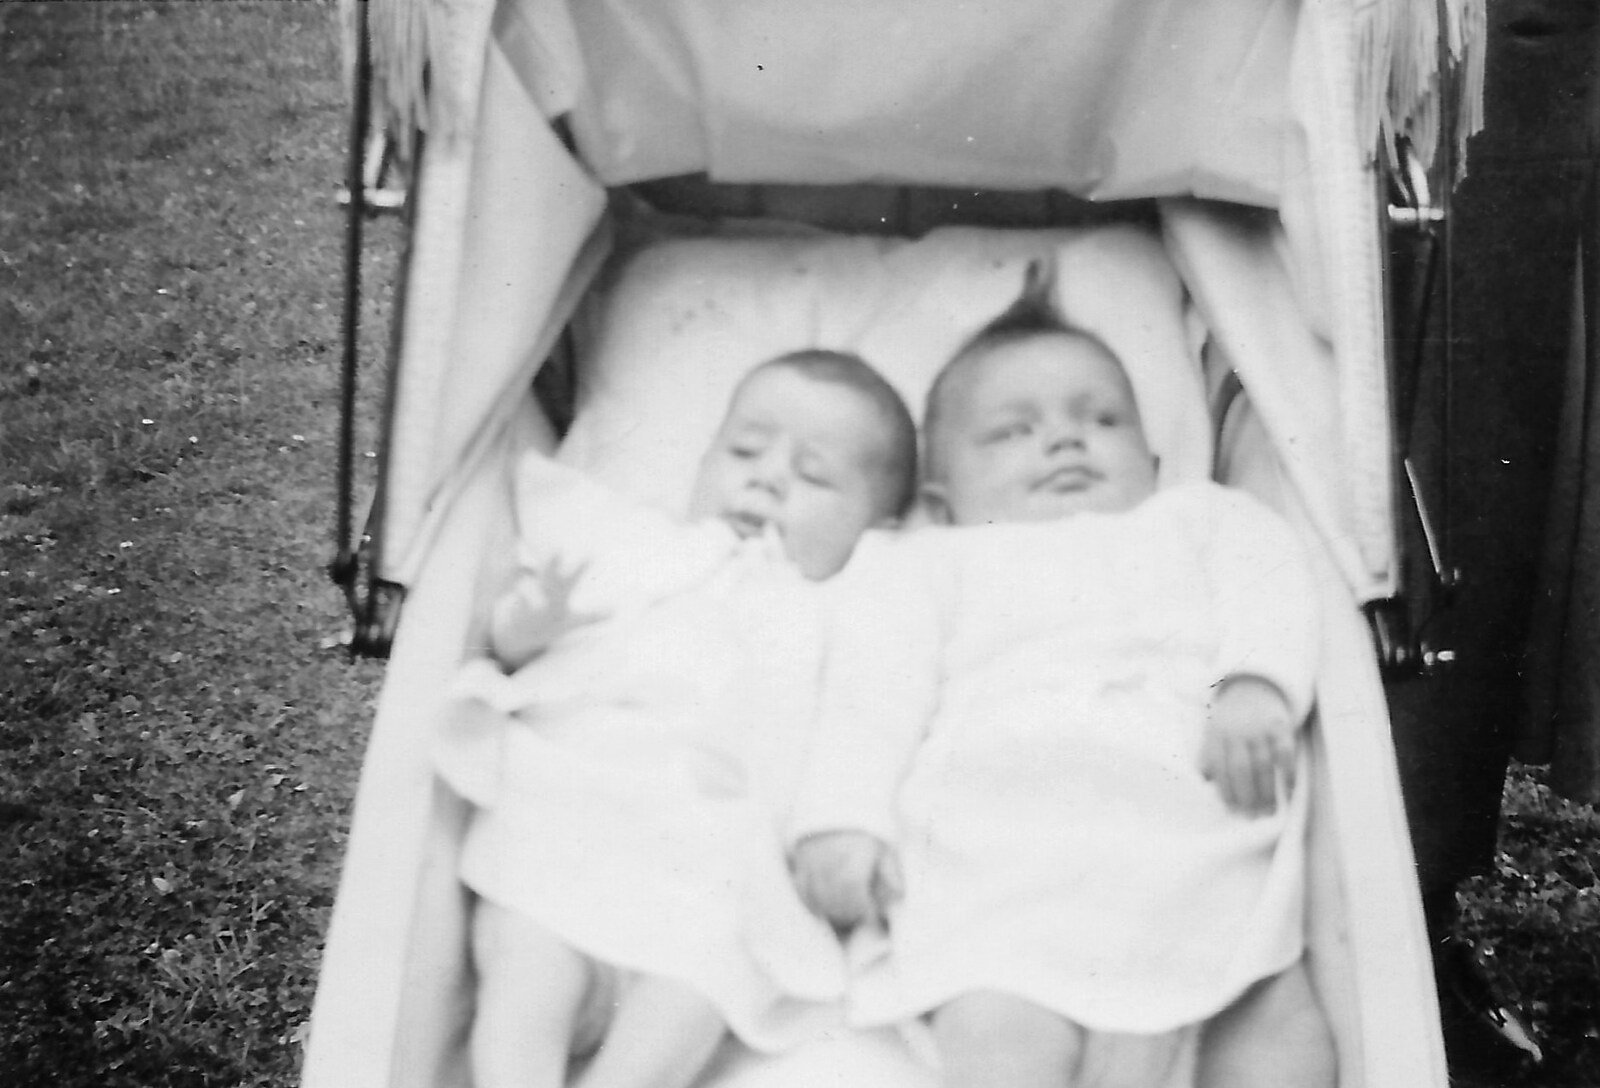 Janet in the pram with Christine from Family History: The 1940s and 1950s - 24th January 2020